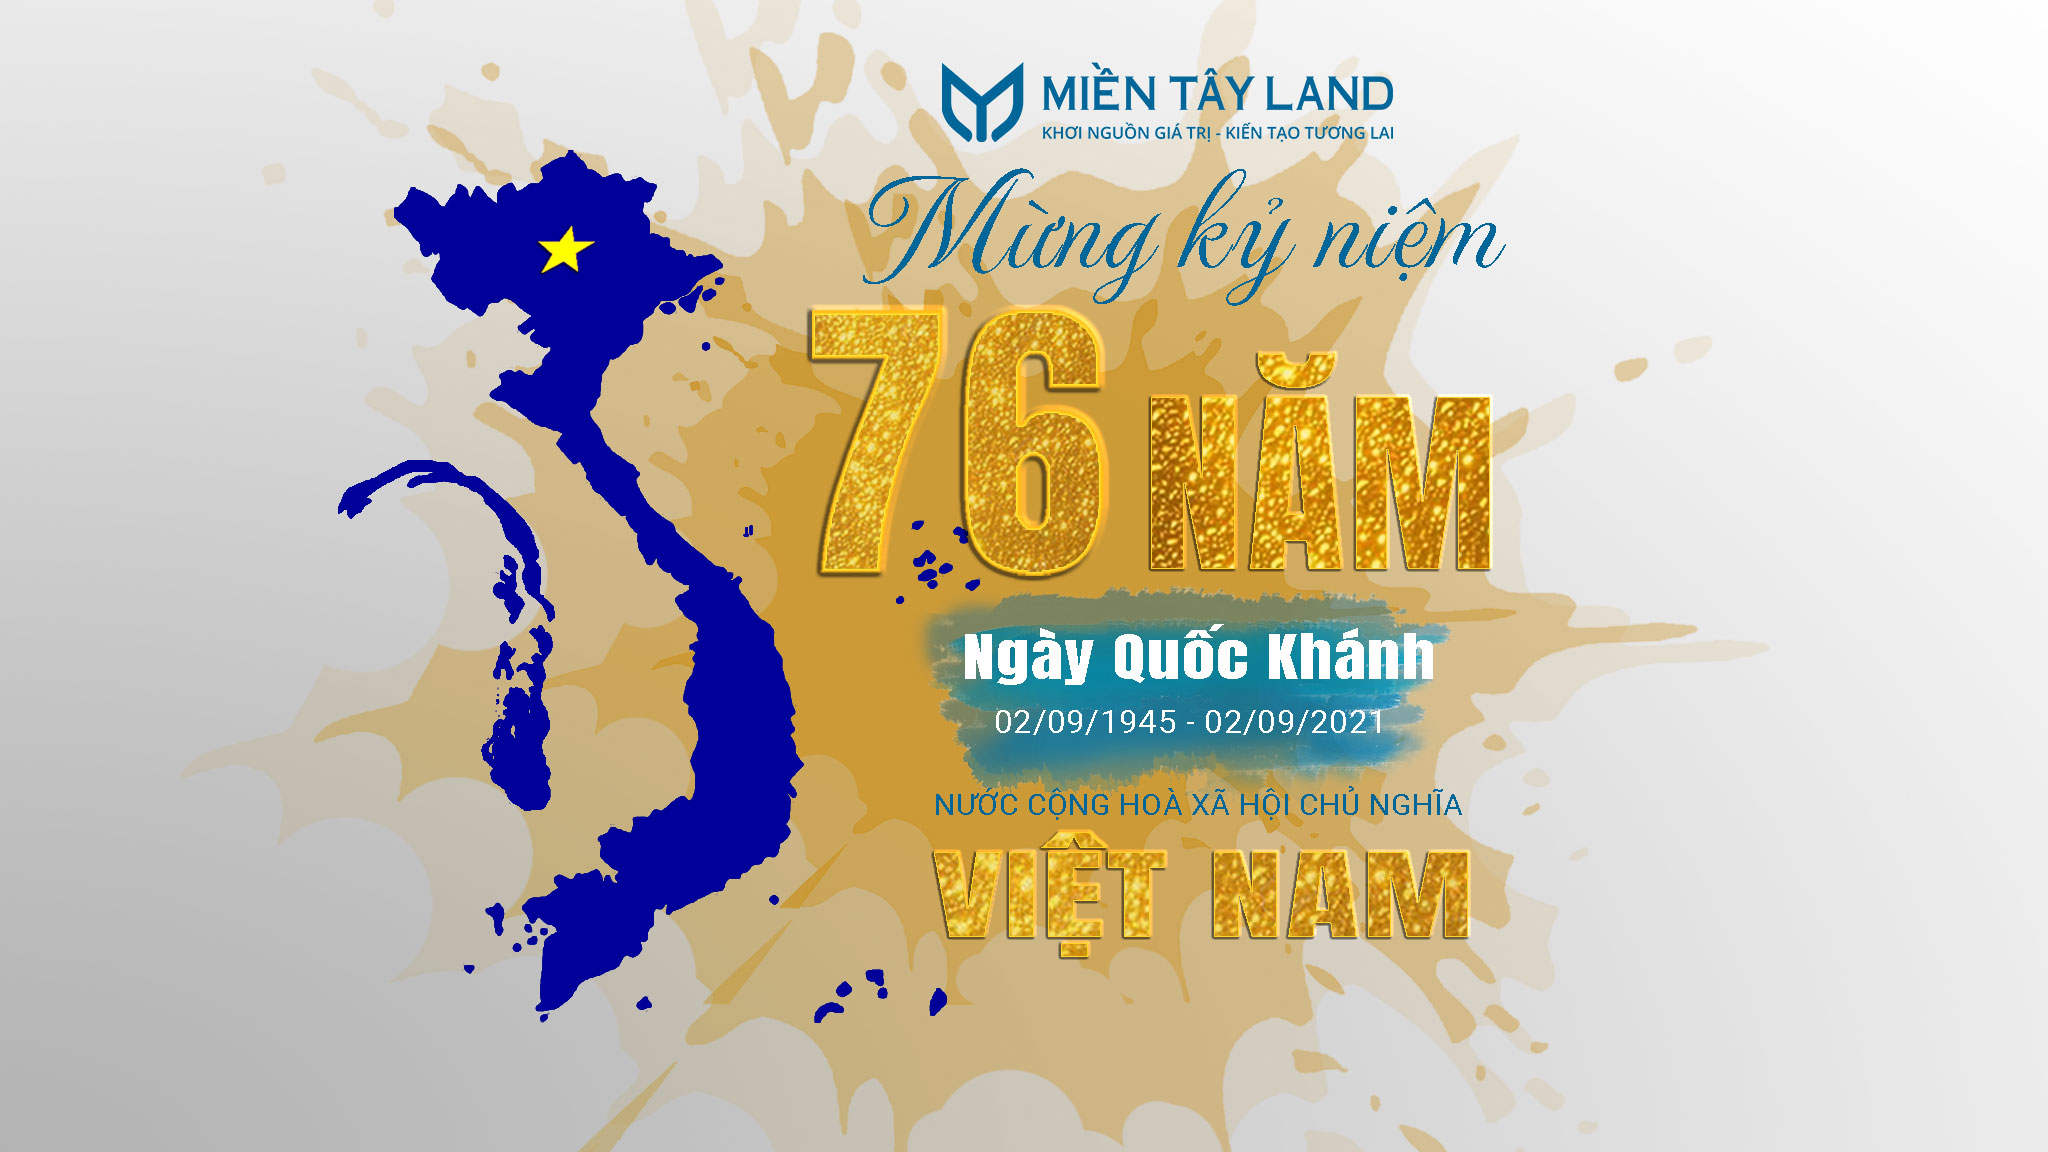 mien tay land mung quoc khanh 02 09 2021 2